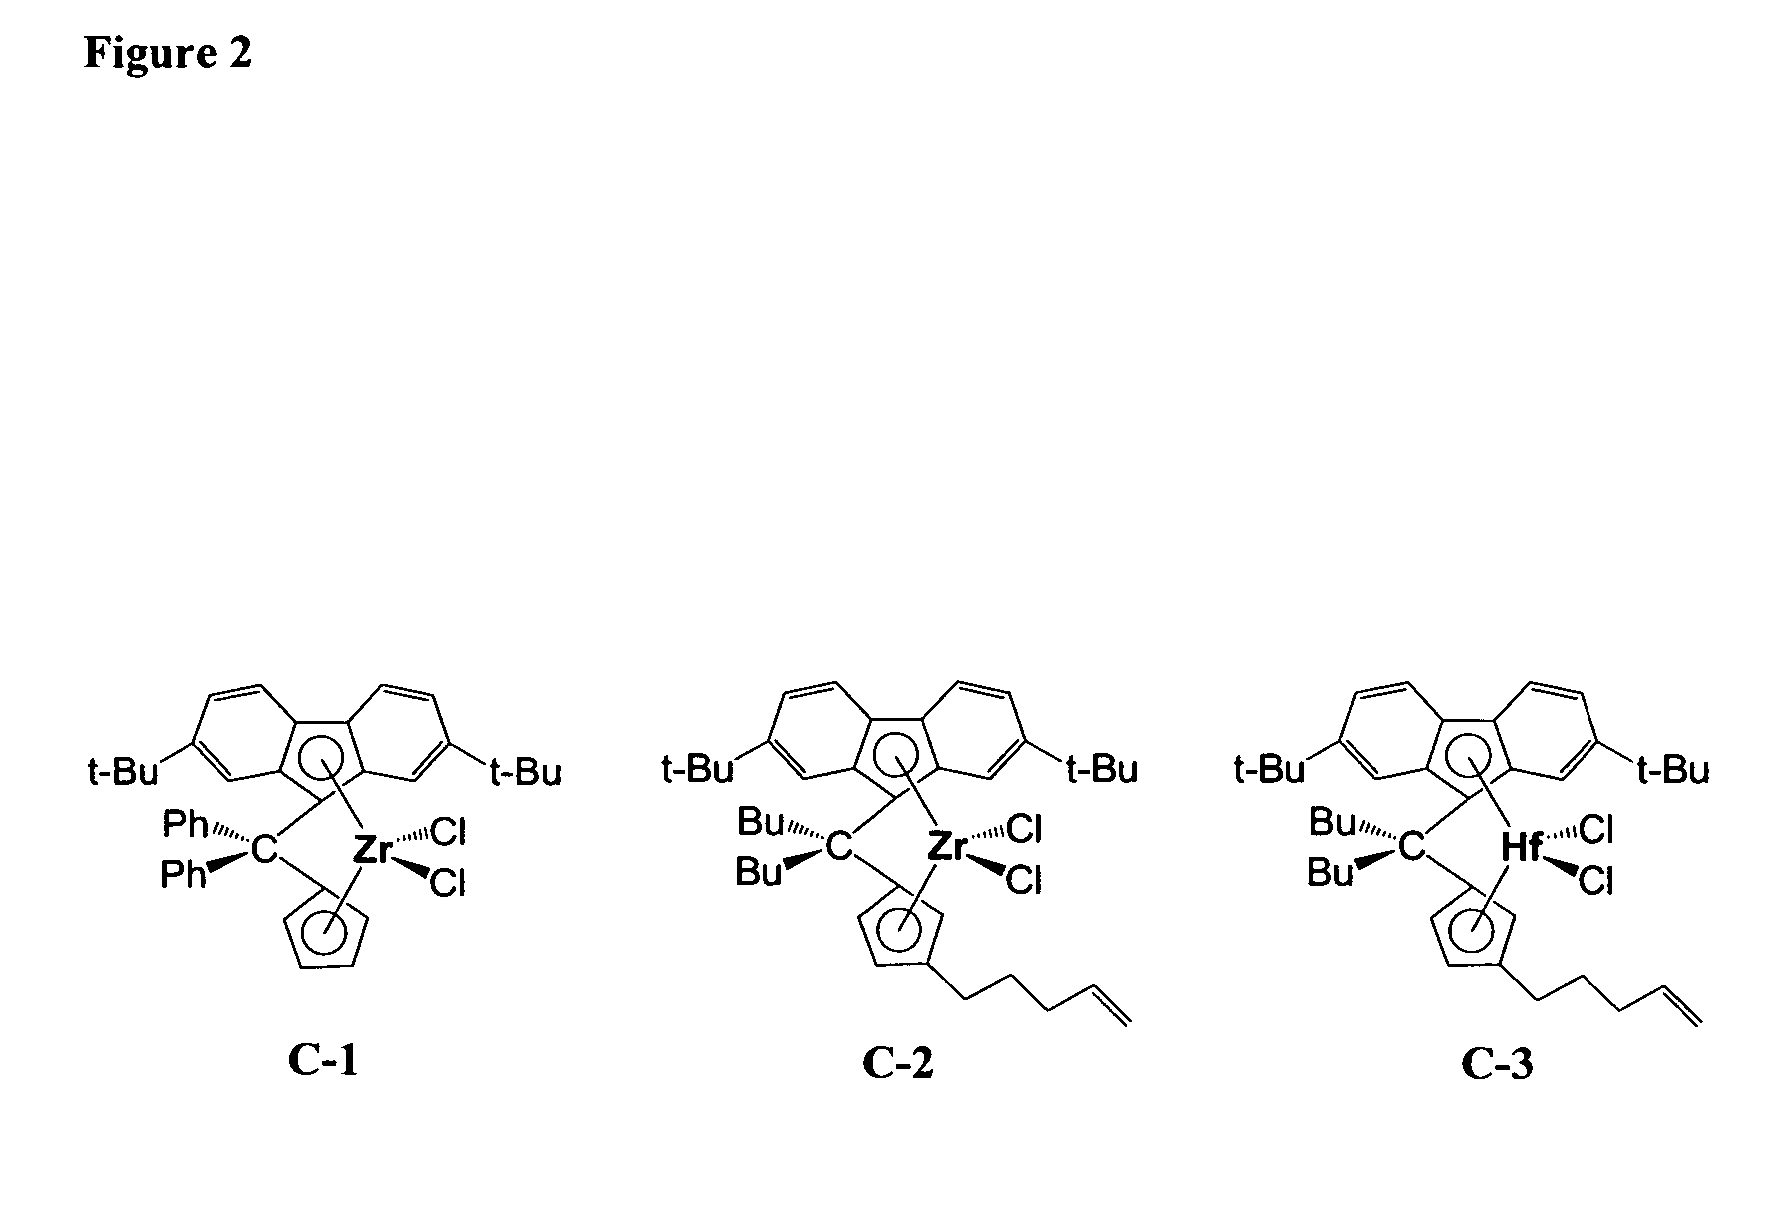 Polymerization catalysts for producing high molecular weight polymers with low levels of long chain branching